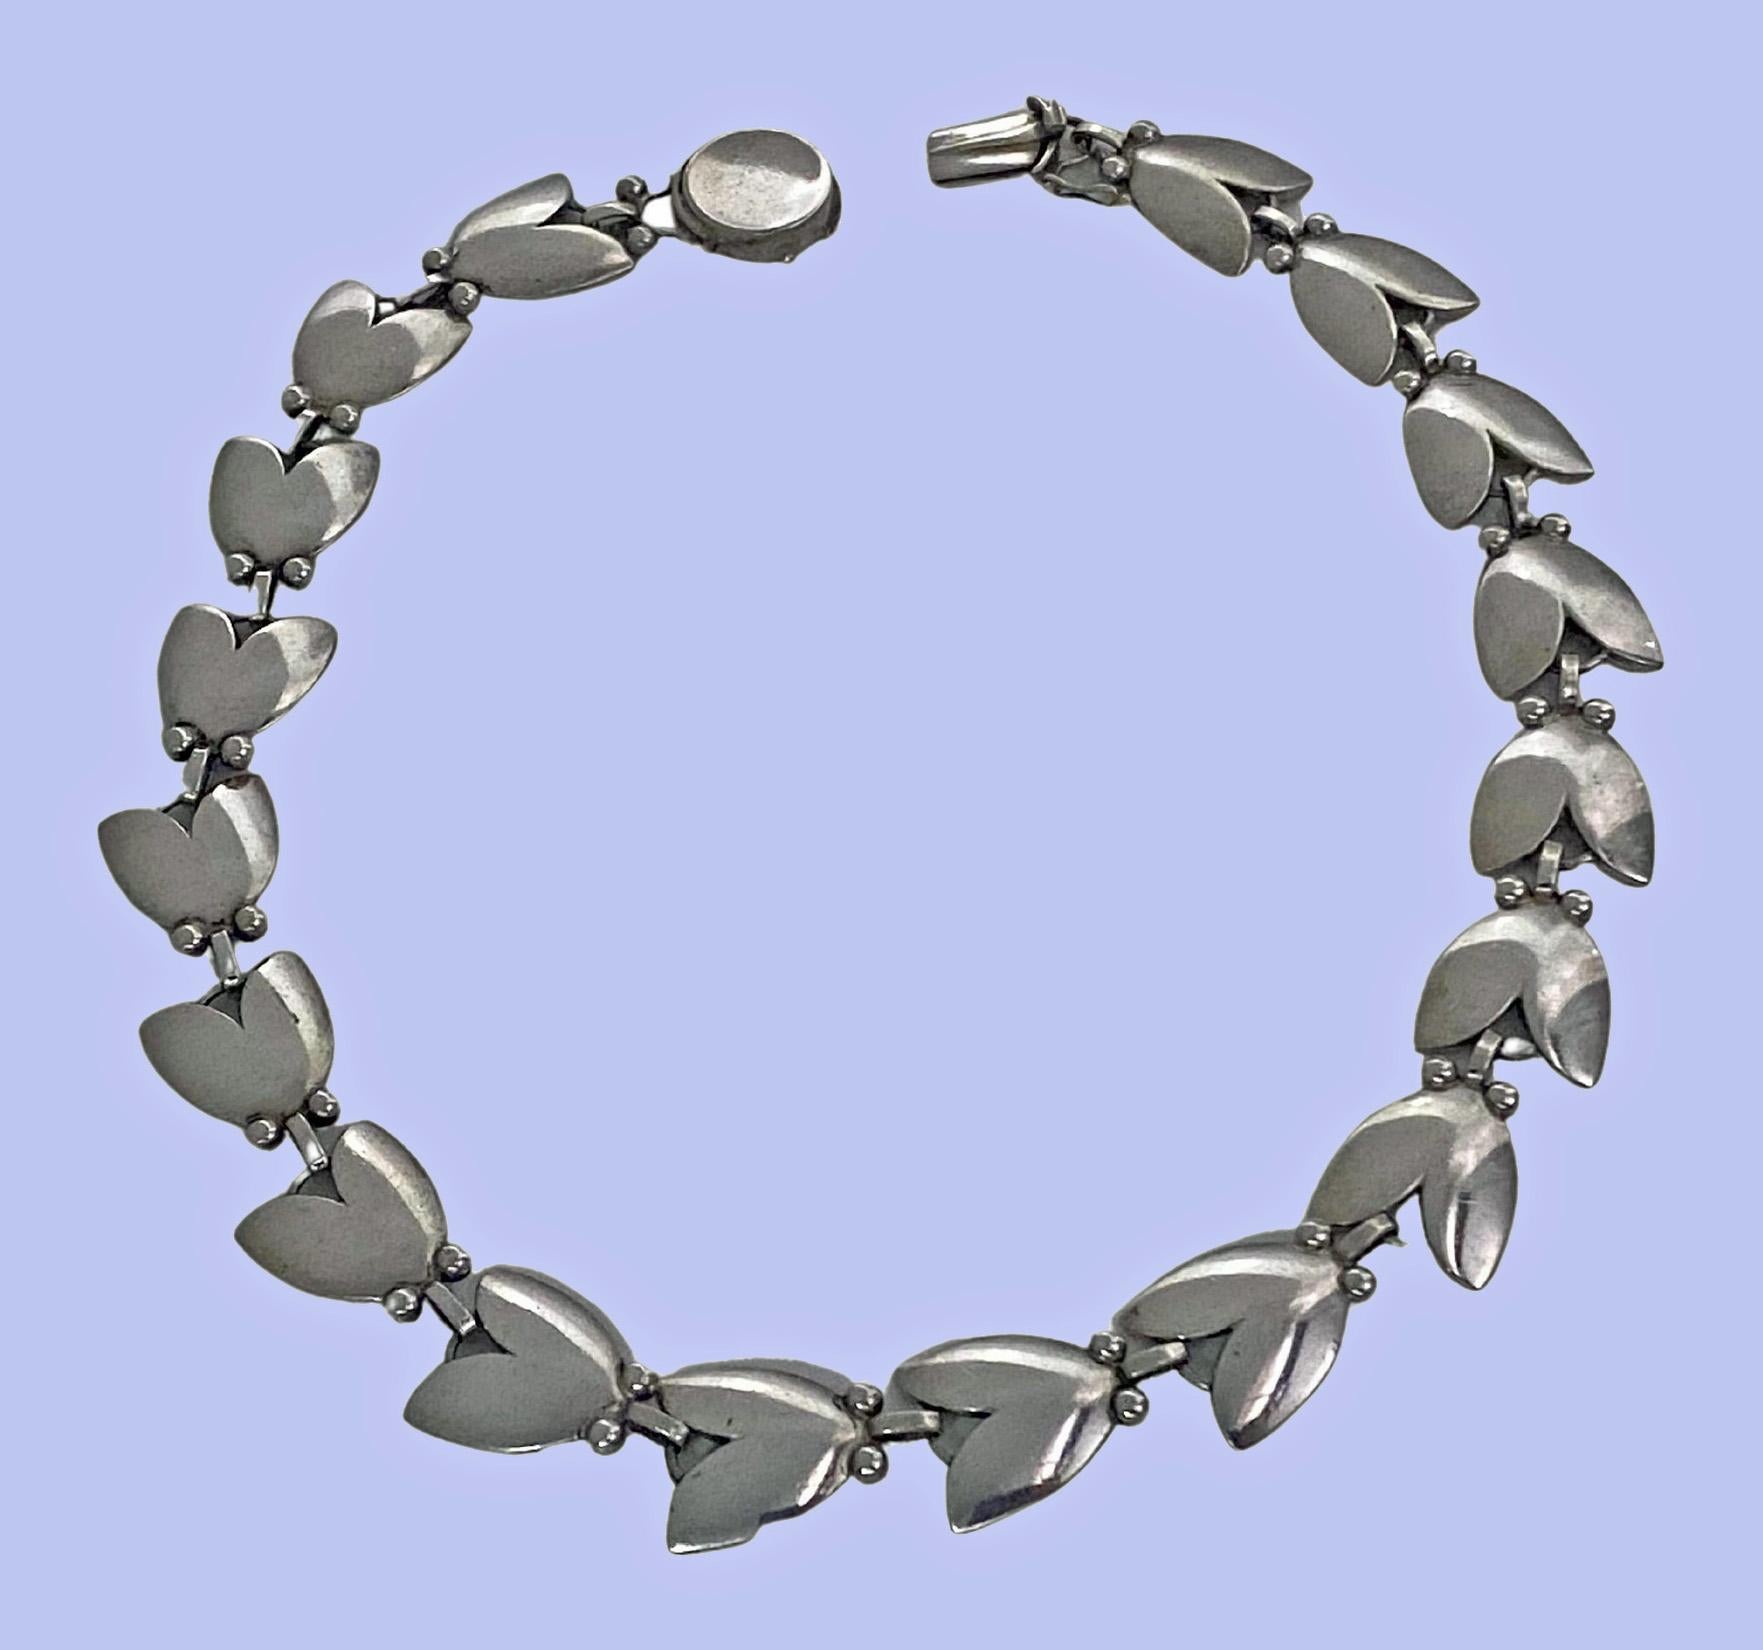 Georg Jensen Sterling Silver Tulip Necklace No. 66 by Harald Nielsen C.1950. The Necklace comprising 18 links of a tulip shape leaf each accented at the base with two berries, terminating with tongue and box clasp fastener, safety catch attached.